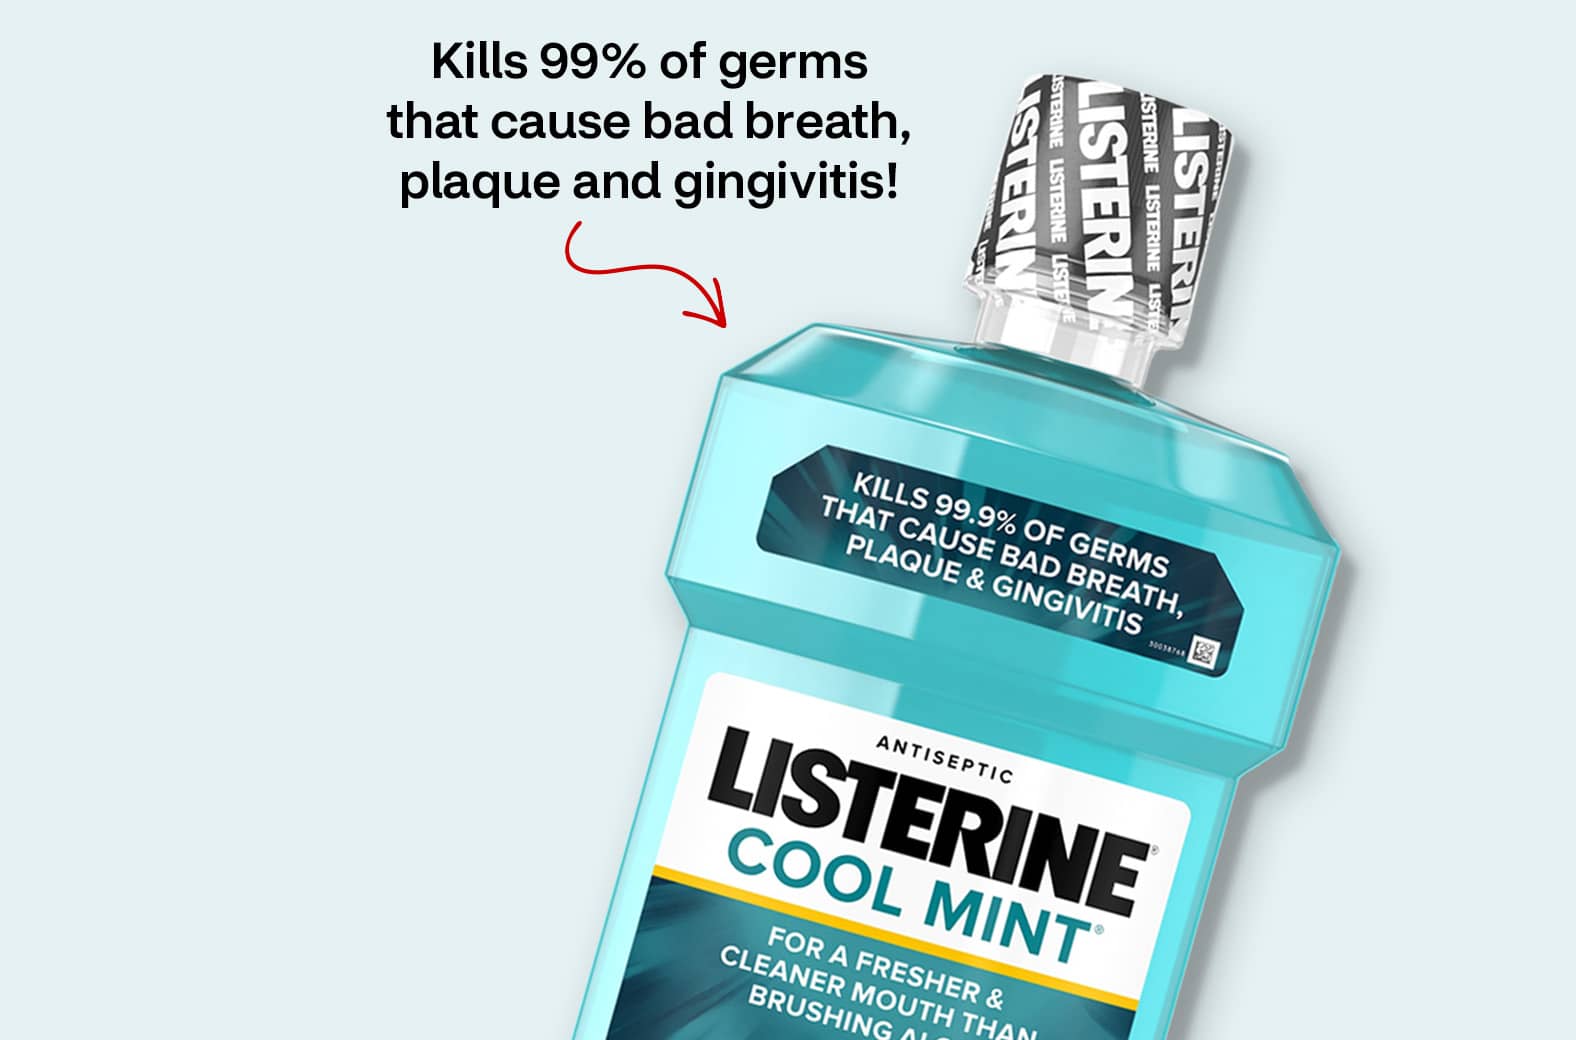 Kills 99 percent of germs that cause bad breath, plaque and gingivitis, Listerine mouthwash